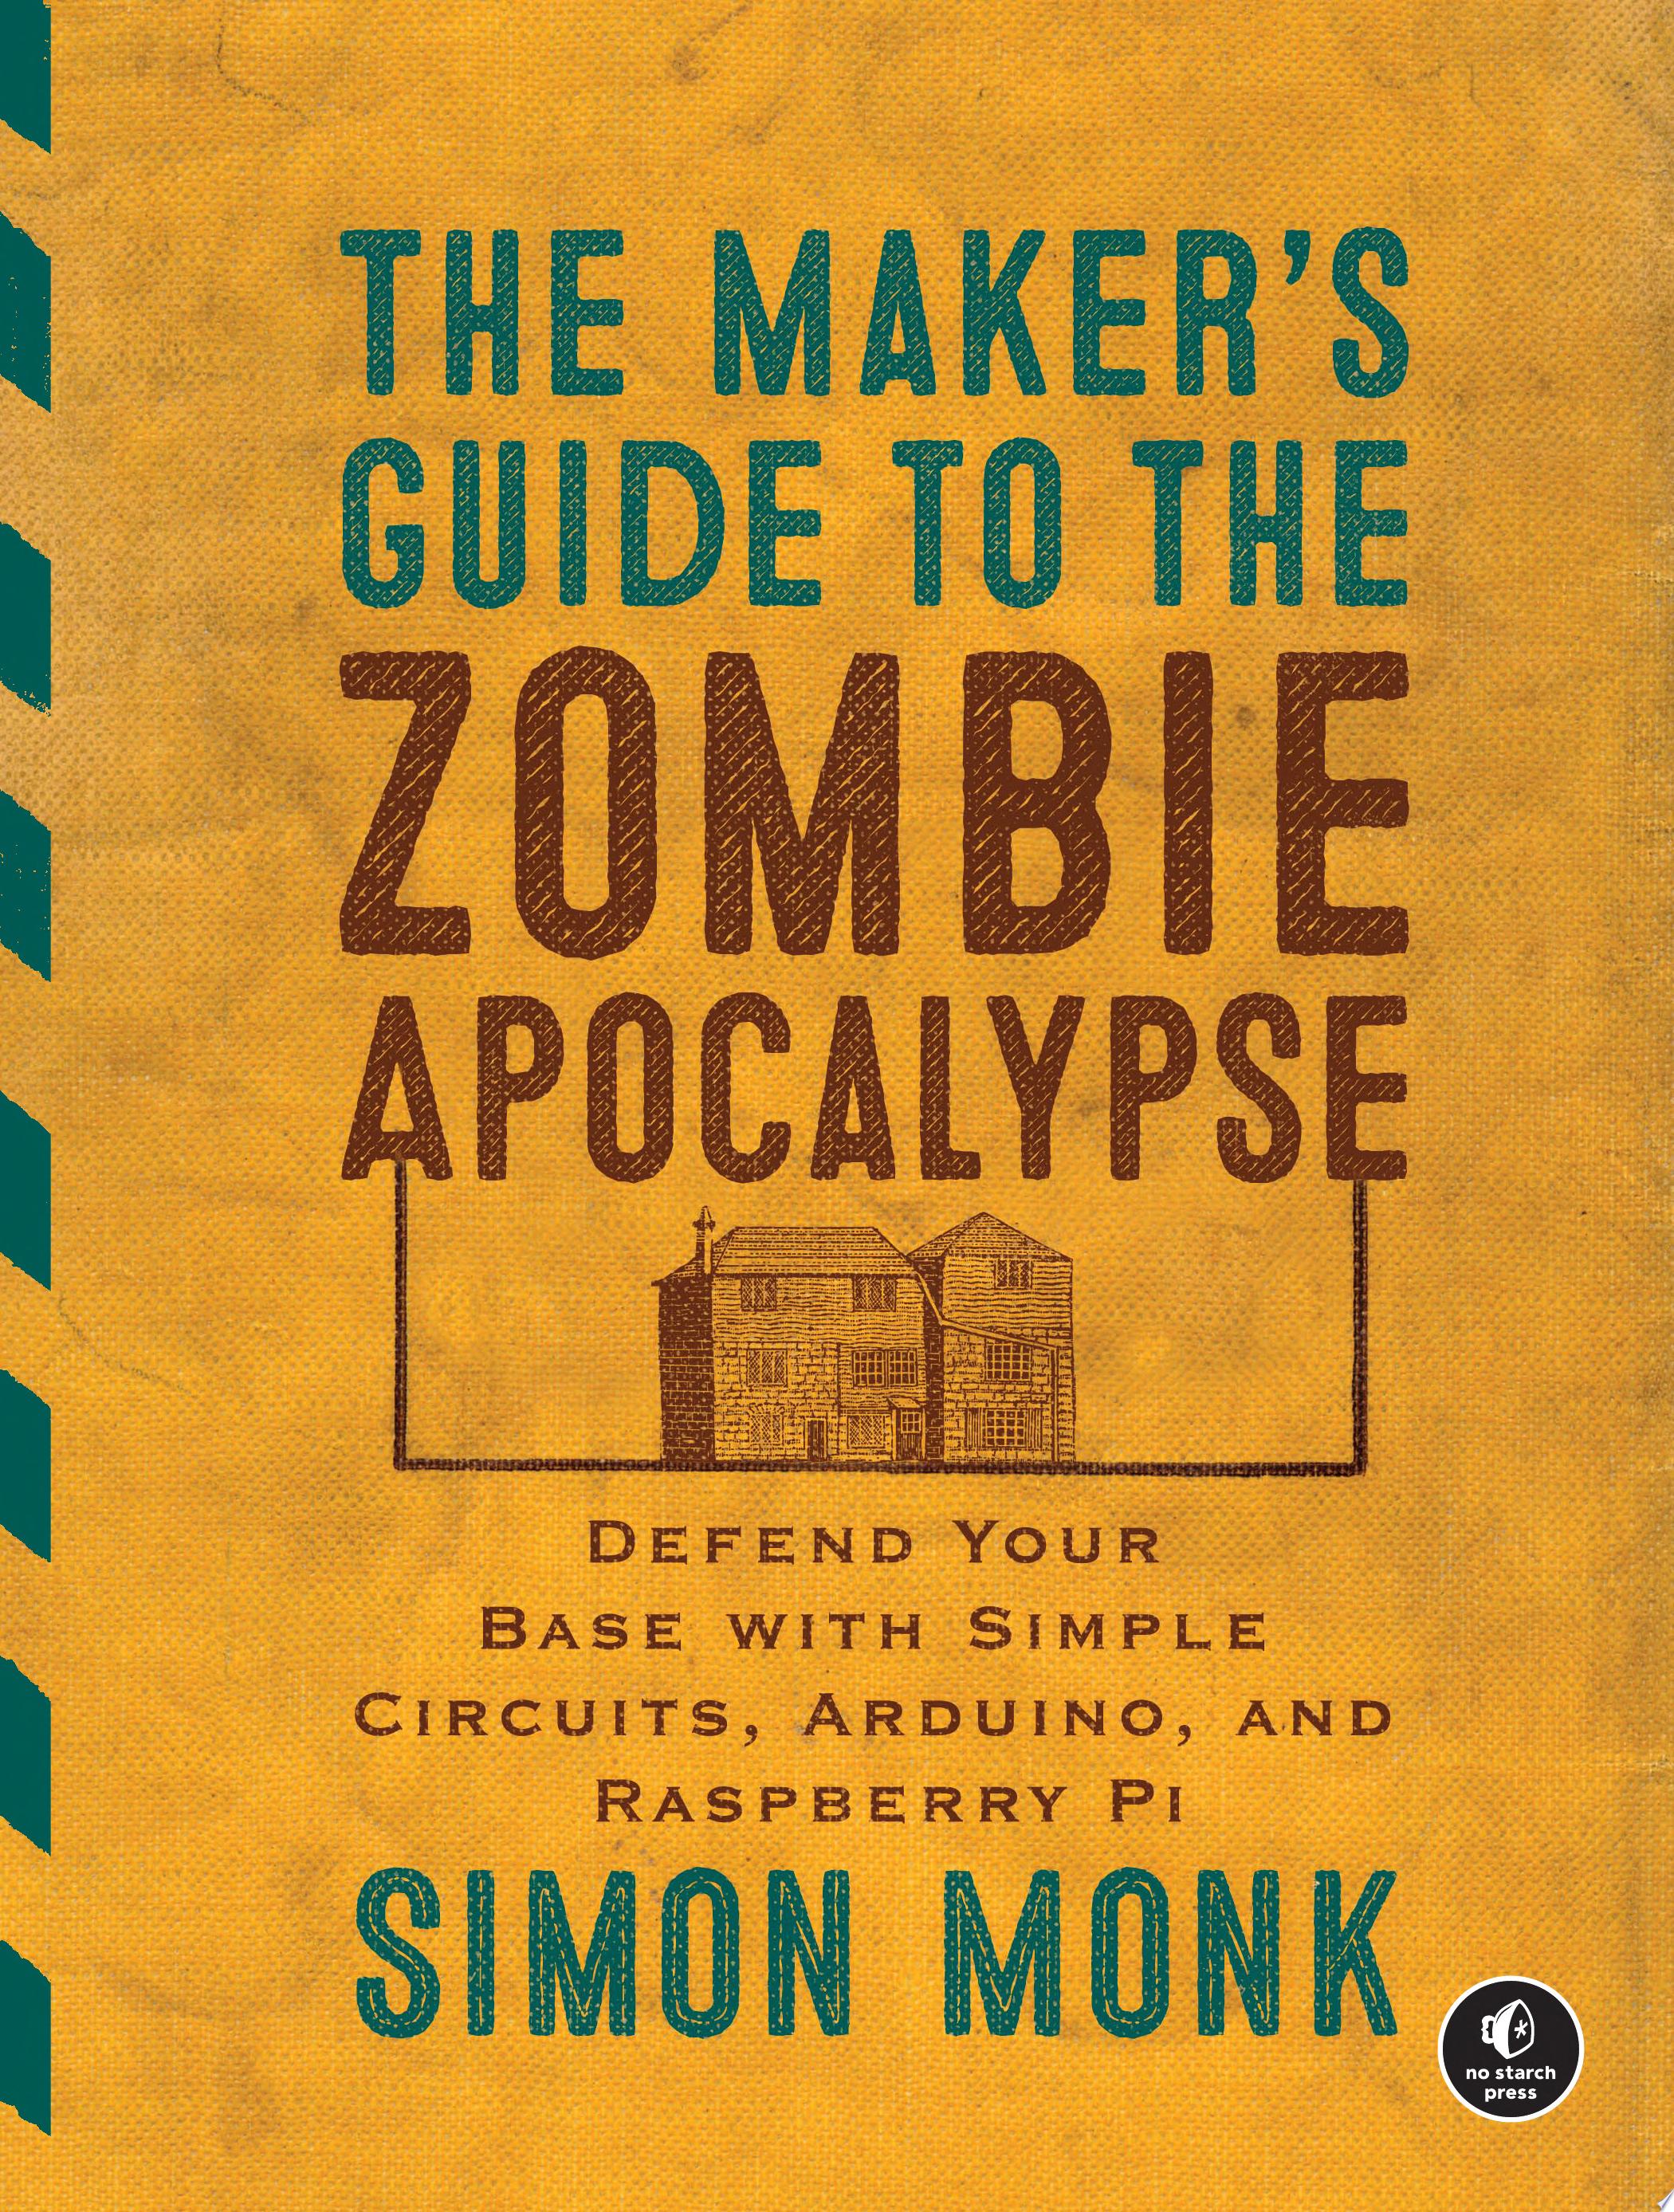 Image for "The Maker's Guide to the Zombie Apocalypse"